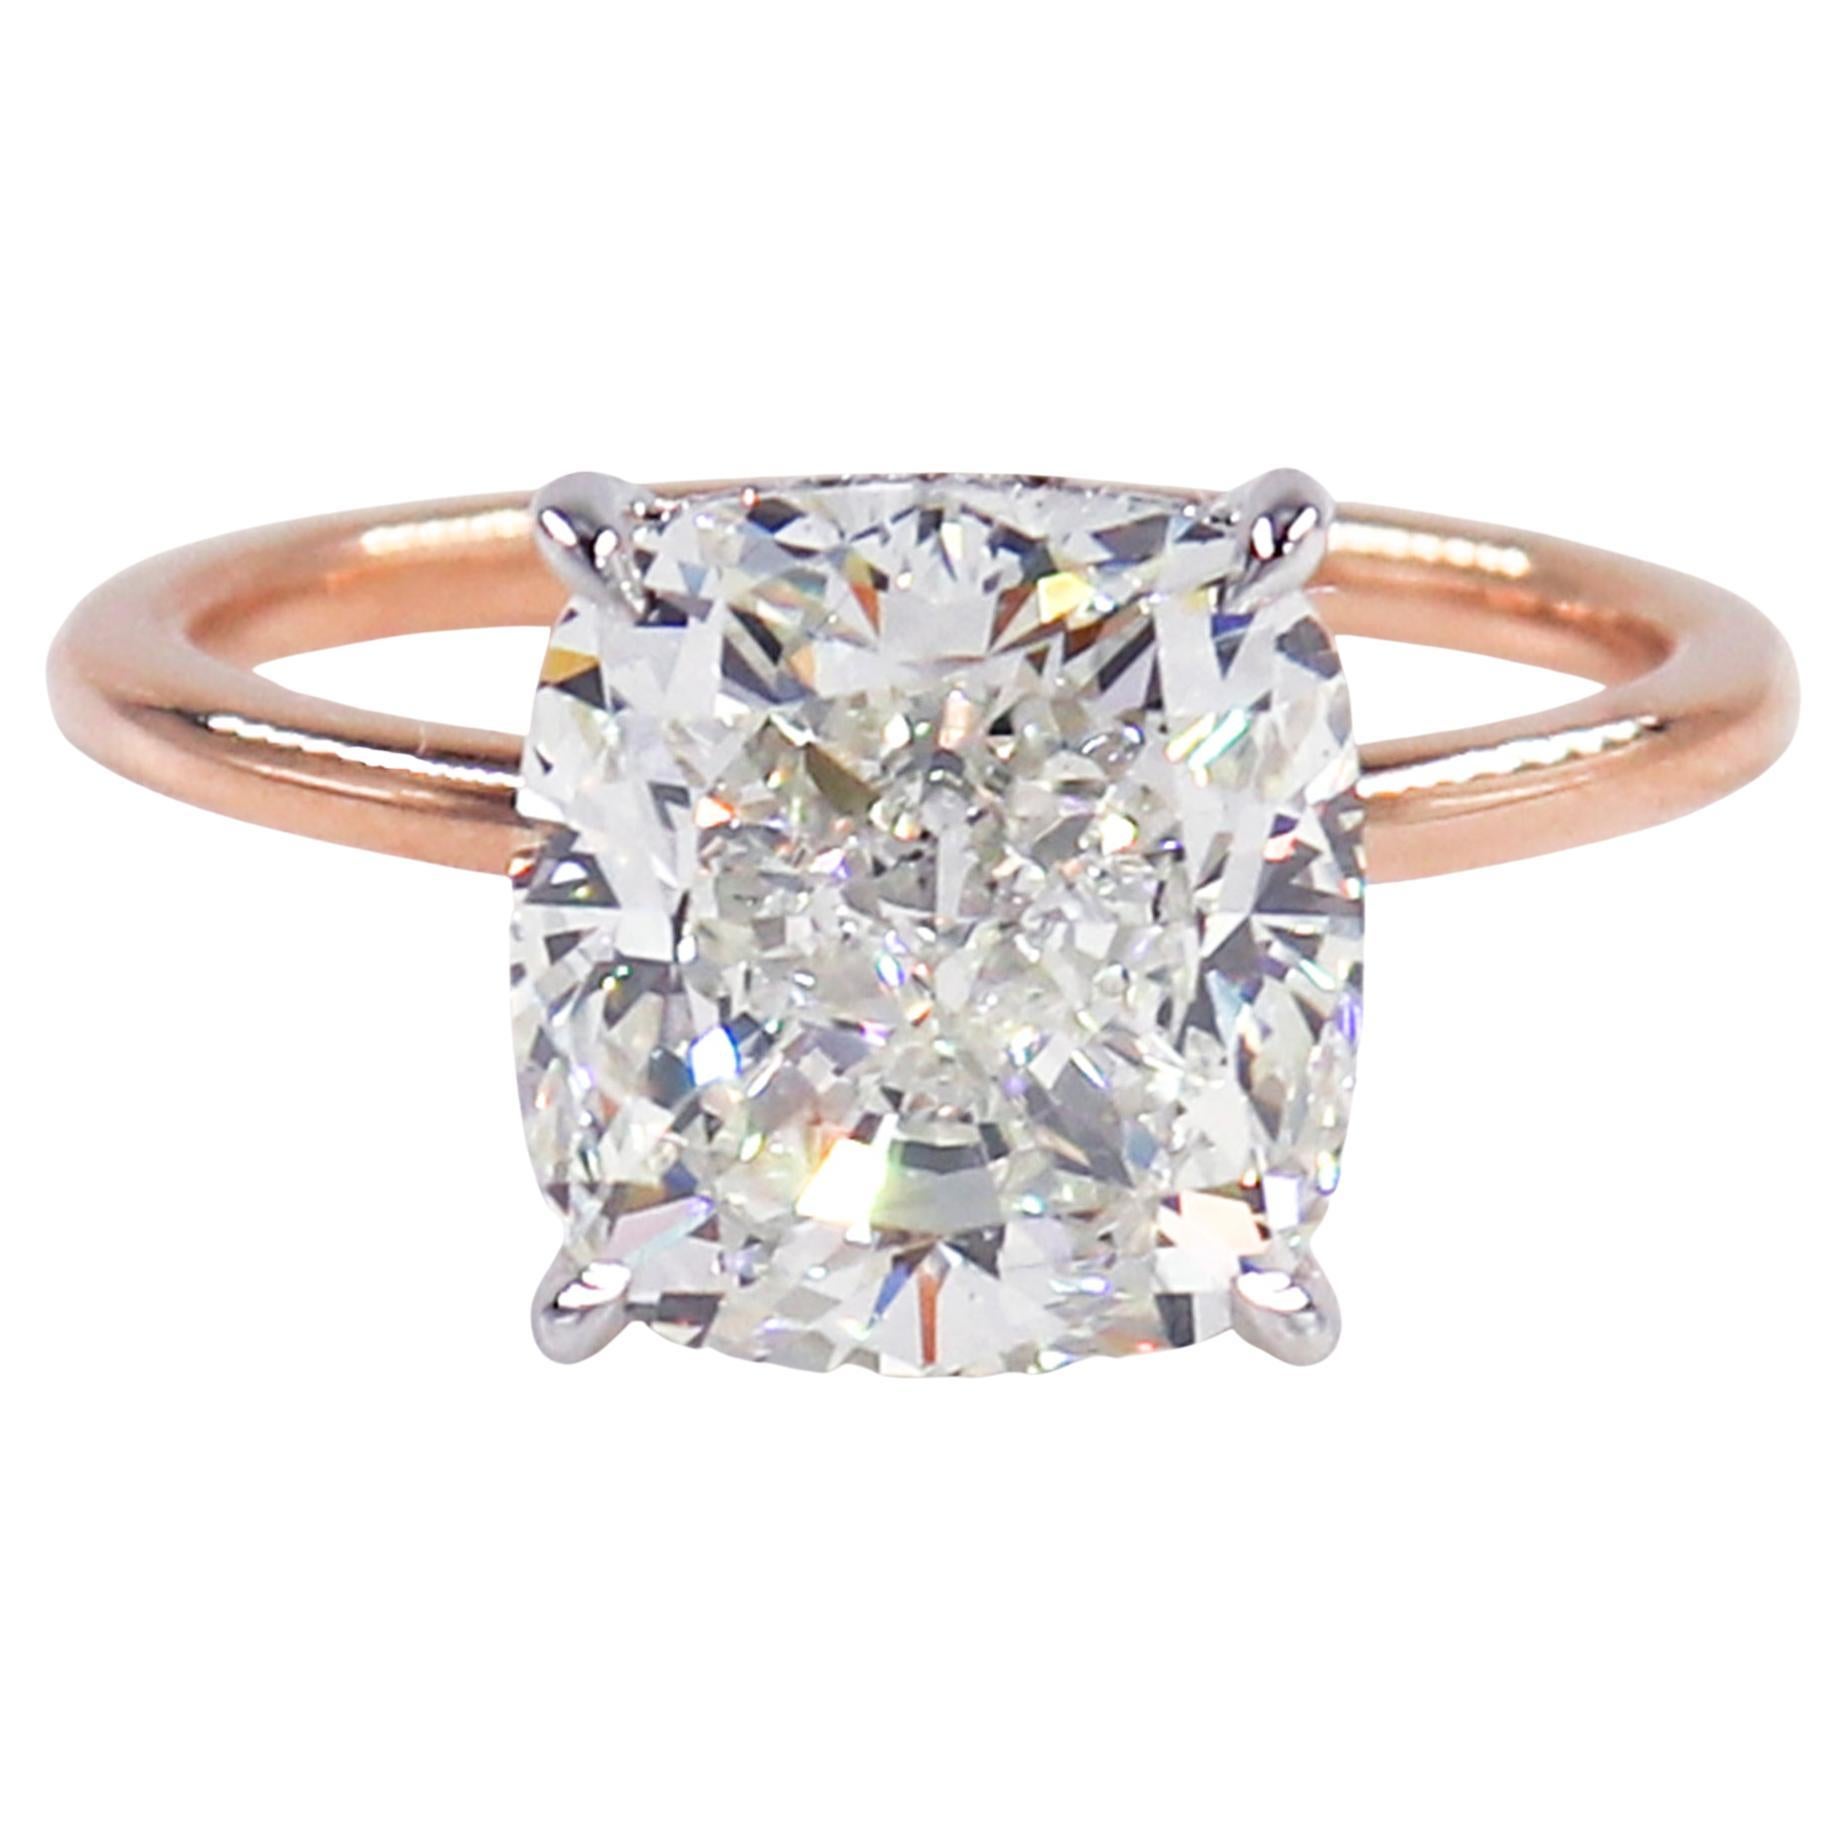 J. Birnbach GIA Certified 5.03 ct Cushion Solitaire Engagement Ring in Rose Gold